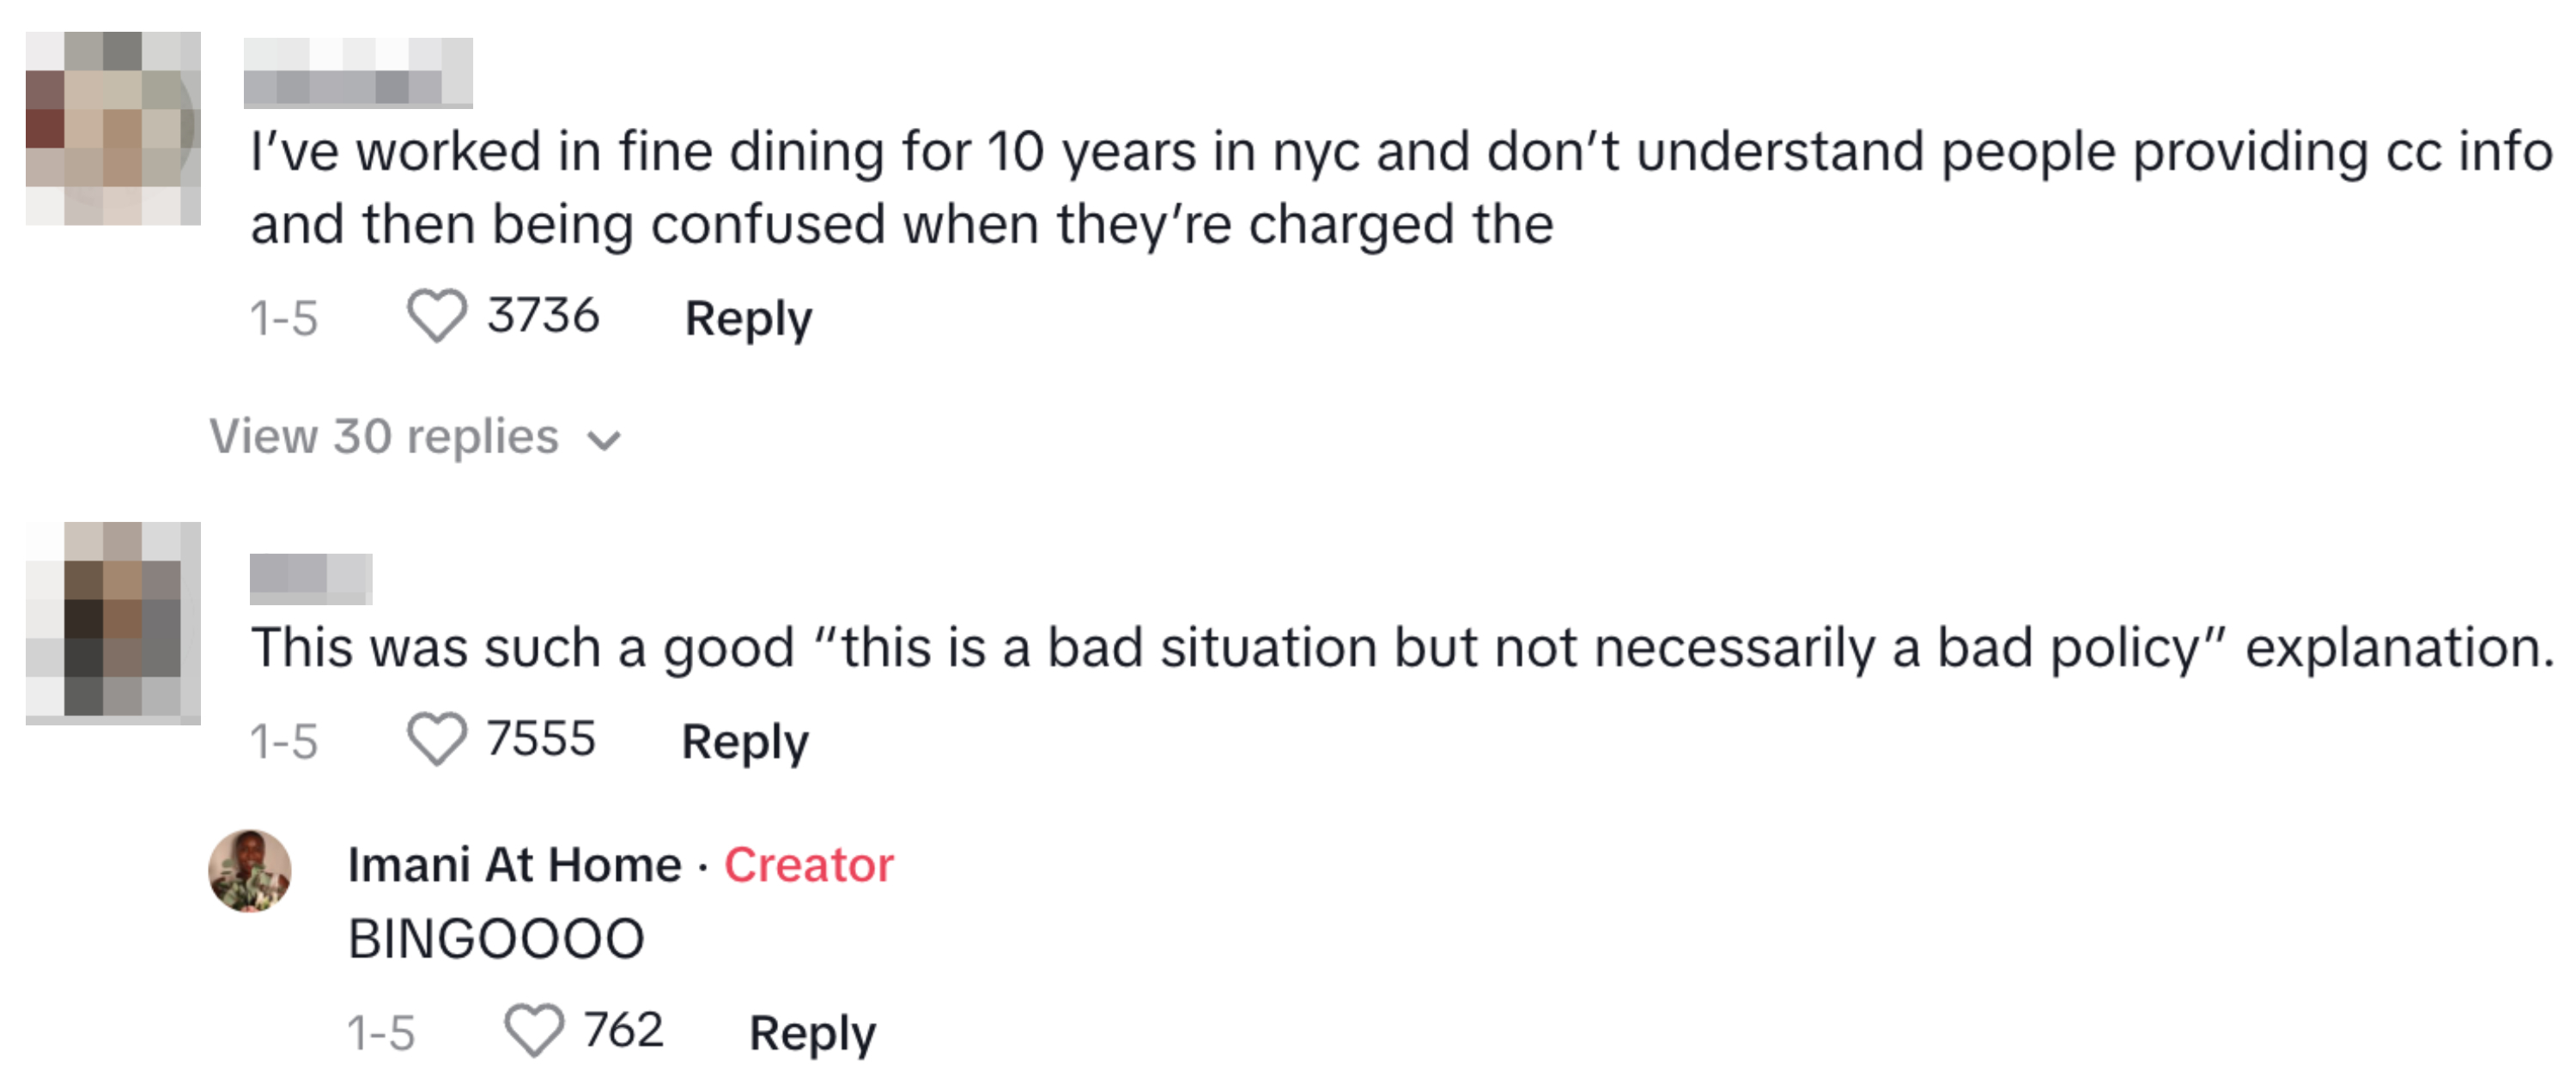 Three social media comments discussing dining experiences and policies, including &quot;I&#x27;ve worked in fine dining for 10 years in nyc and don&#x27;t understand people providing cc info and then being confused when they&#x27;re charged&quot;